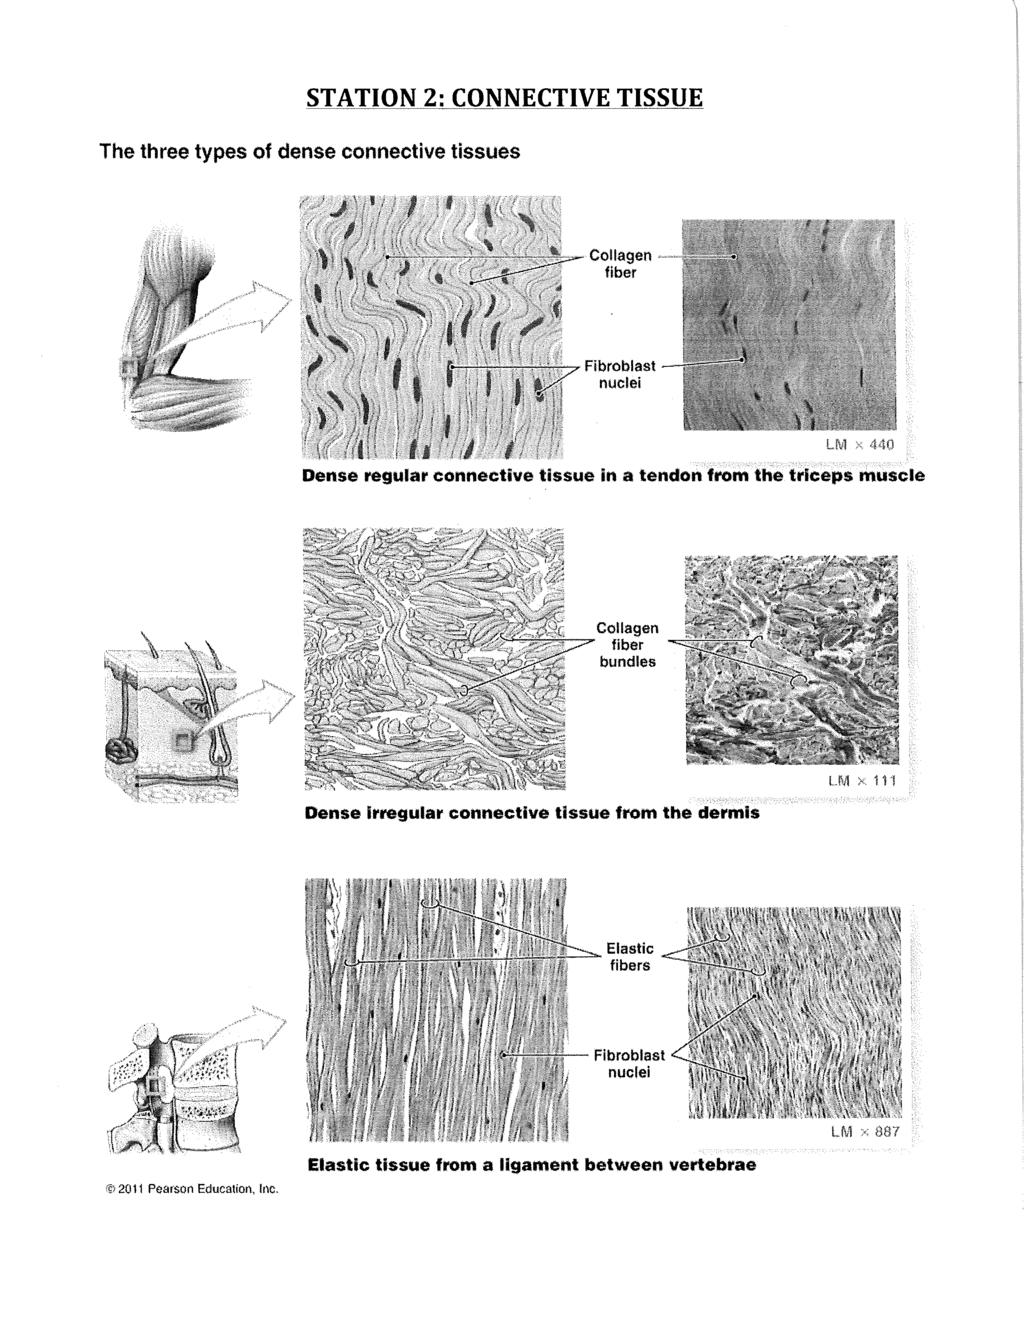 STATION 2: CONNECTIVE TISSUE The three types of dense connective tissues Collagen fiber Fibroblast nuclei tfcl x 440 Dense regular